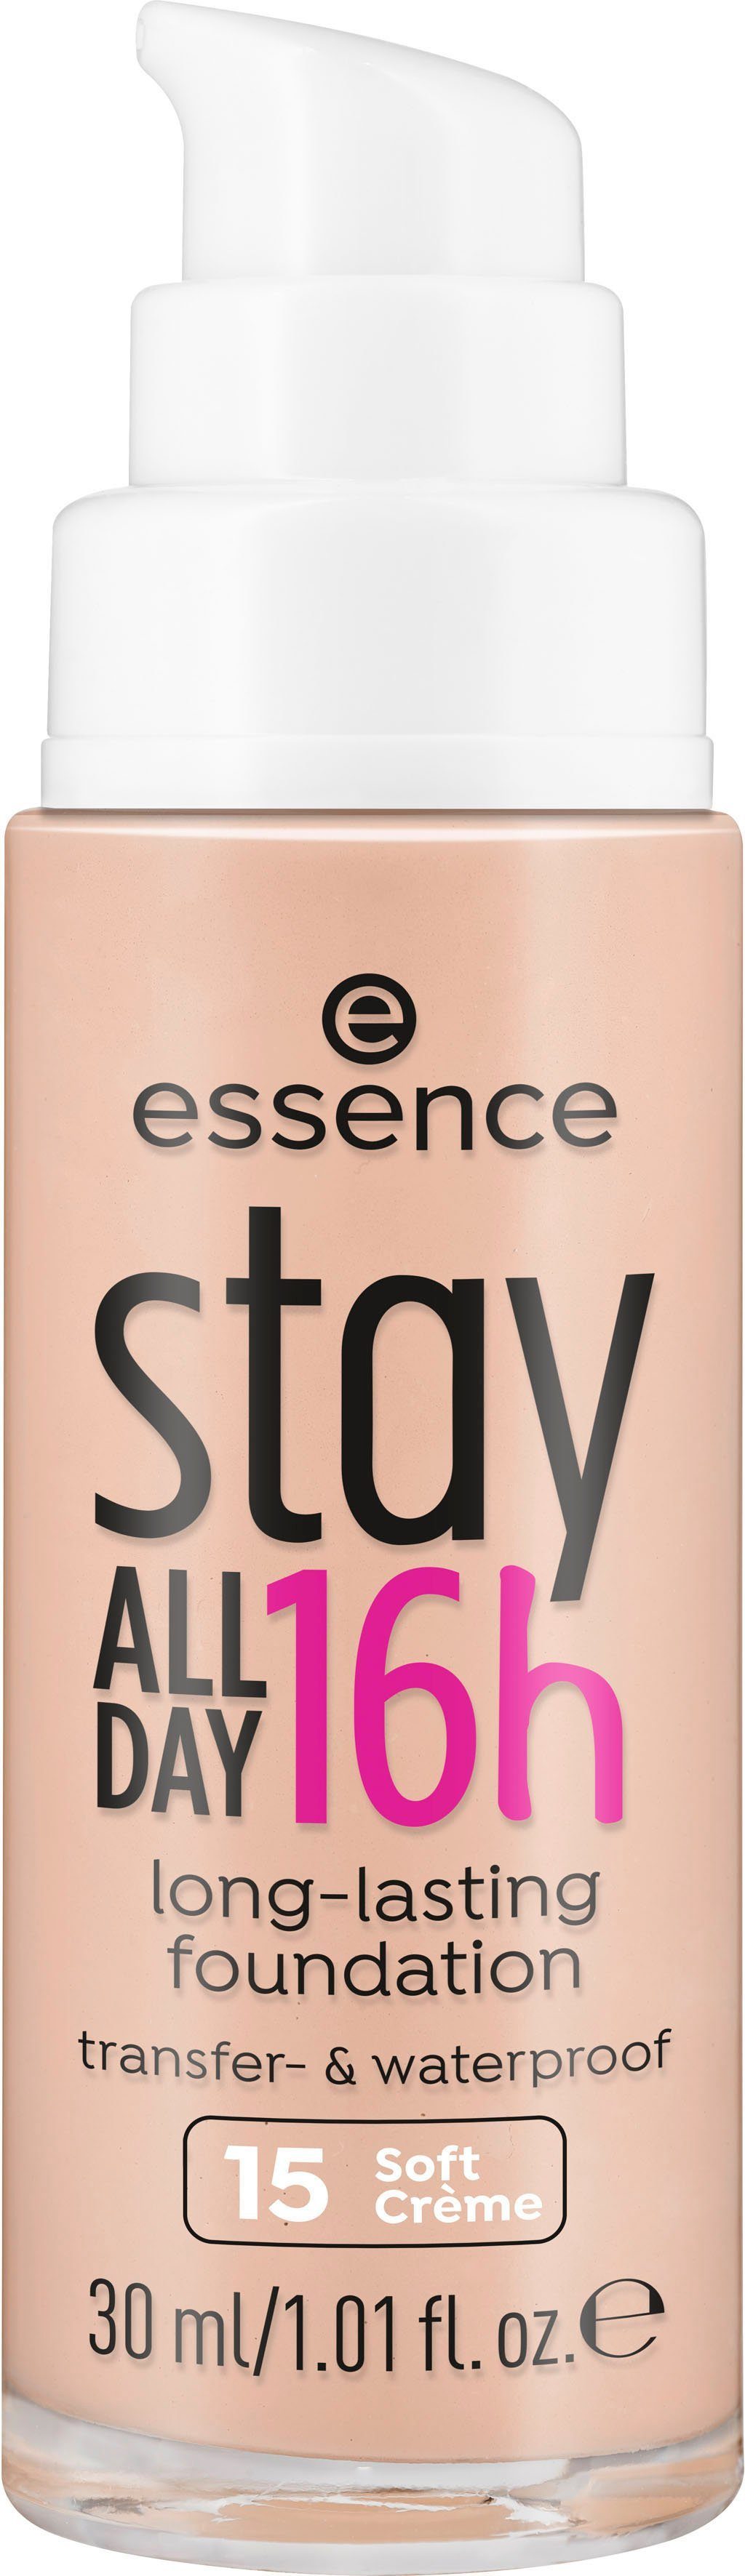 Essence Foundation Creme 16h long-lasting, Soft stay ALL 3-tlg. DAY